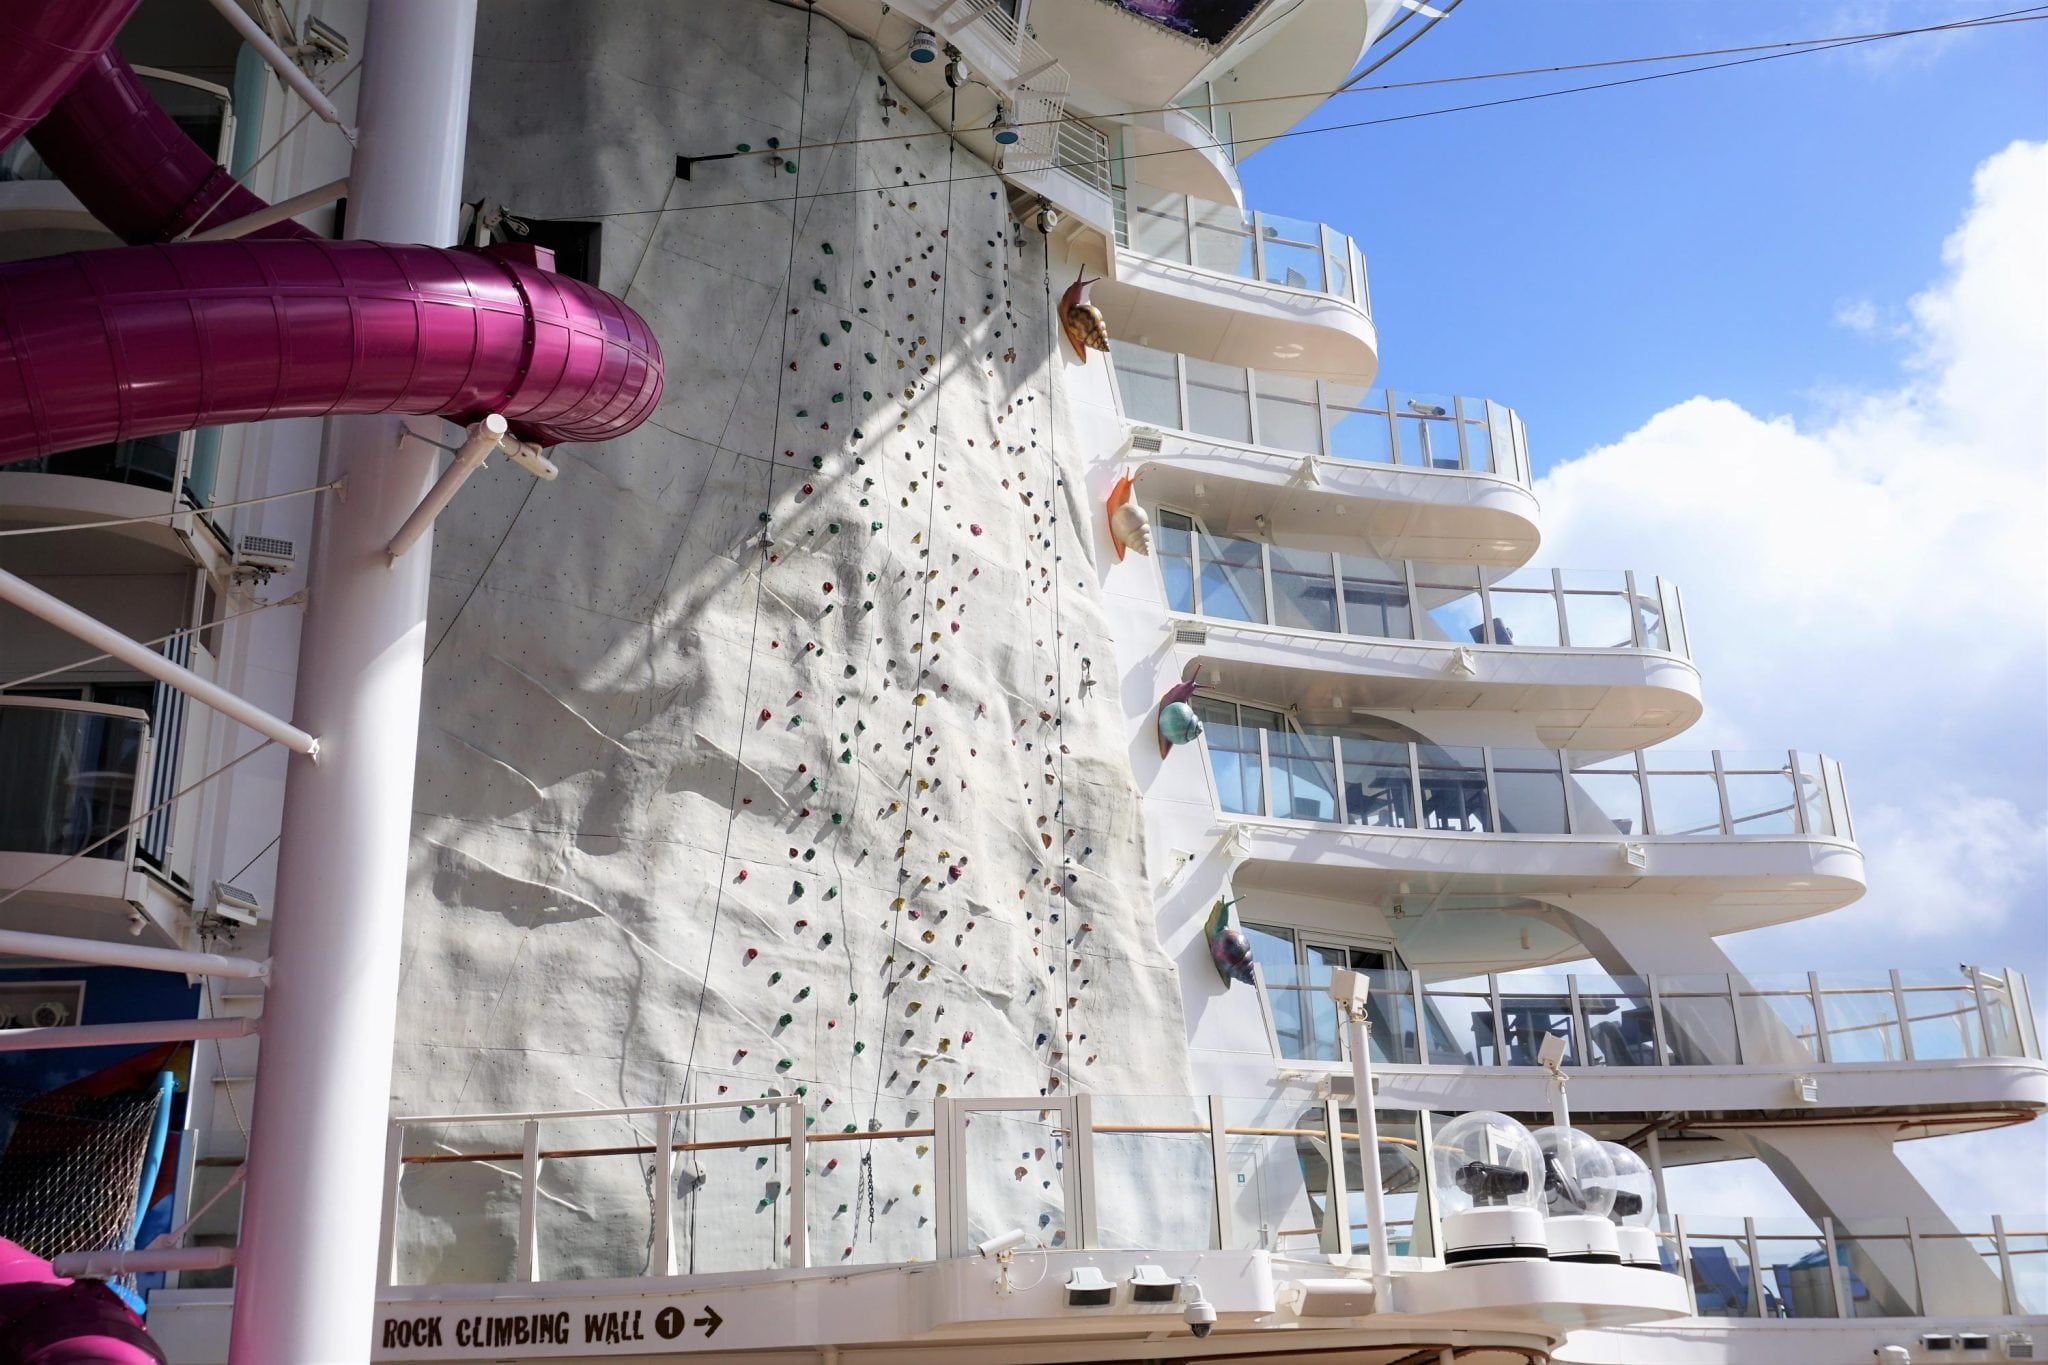 Top Activities for Adventure Seekers on Harmony of the Seas